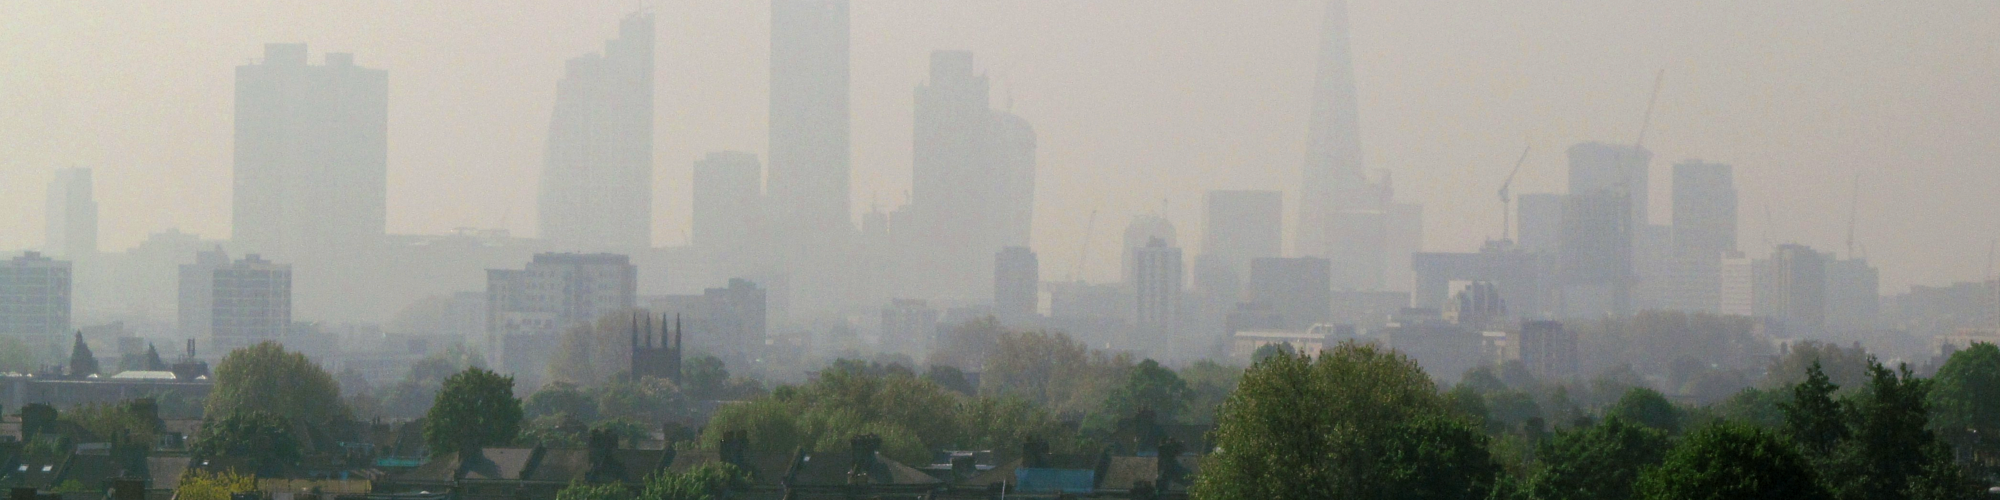 Voters want tougher action on air pollution from national Government, says Bright Blue